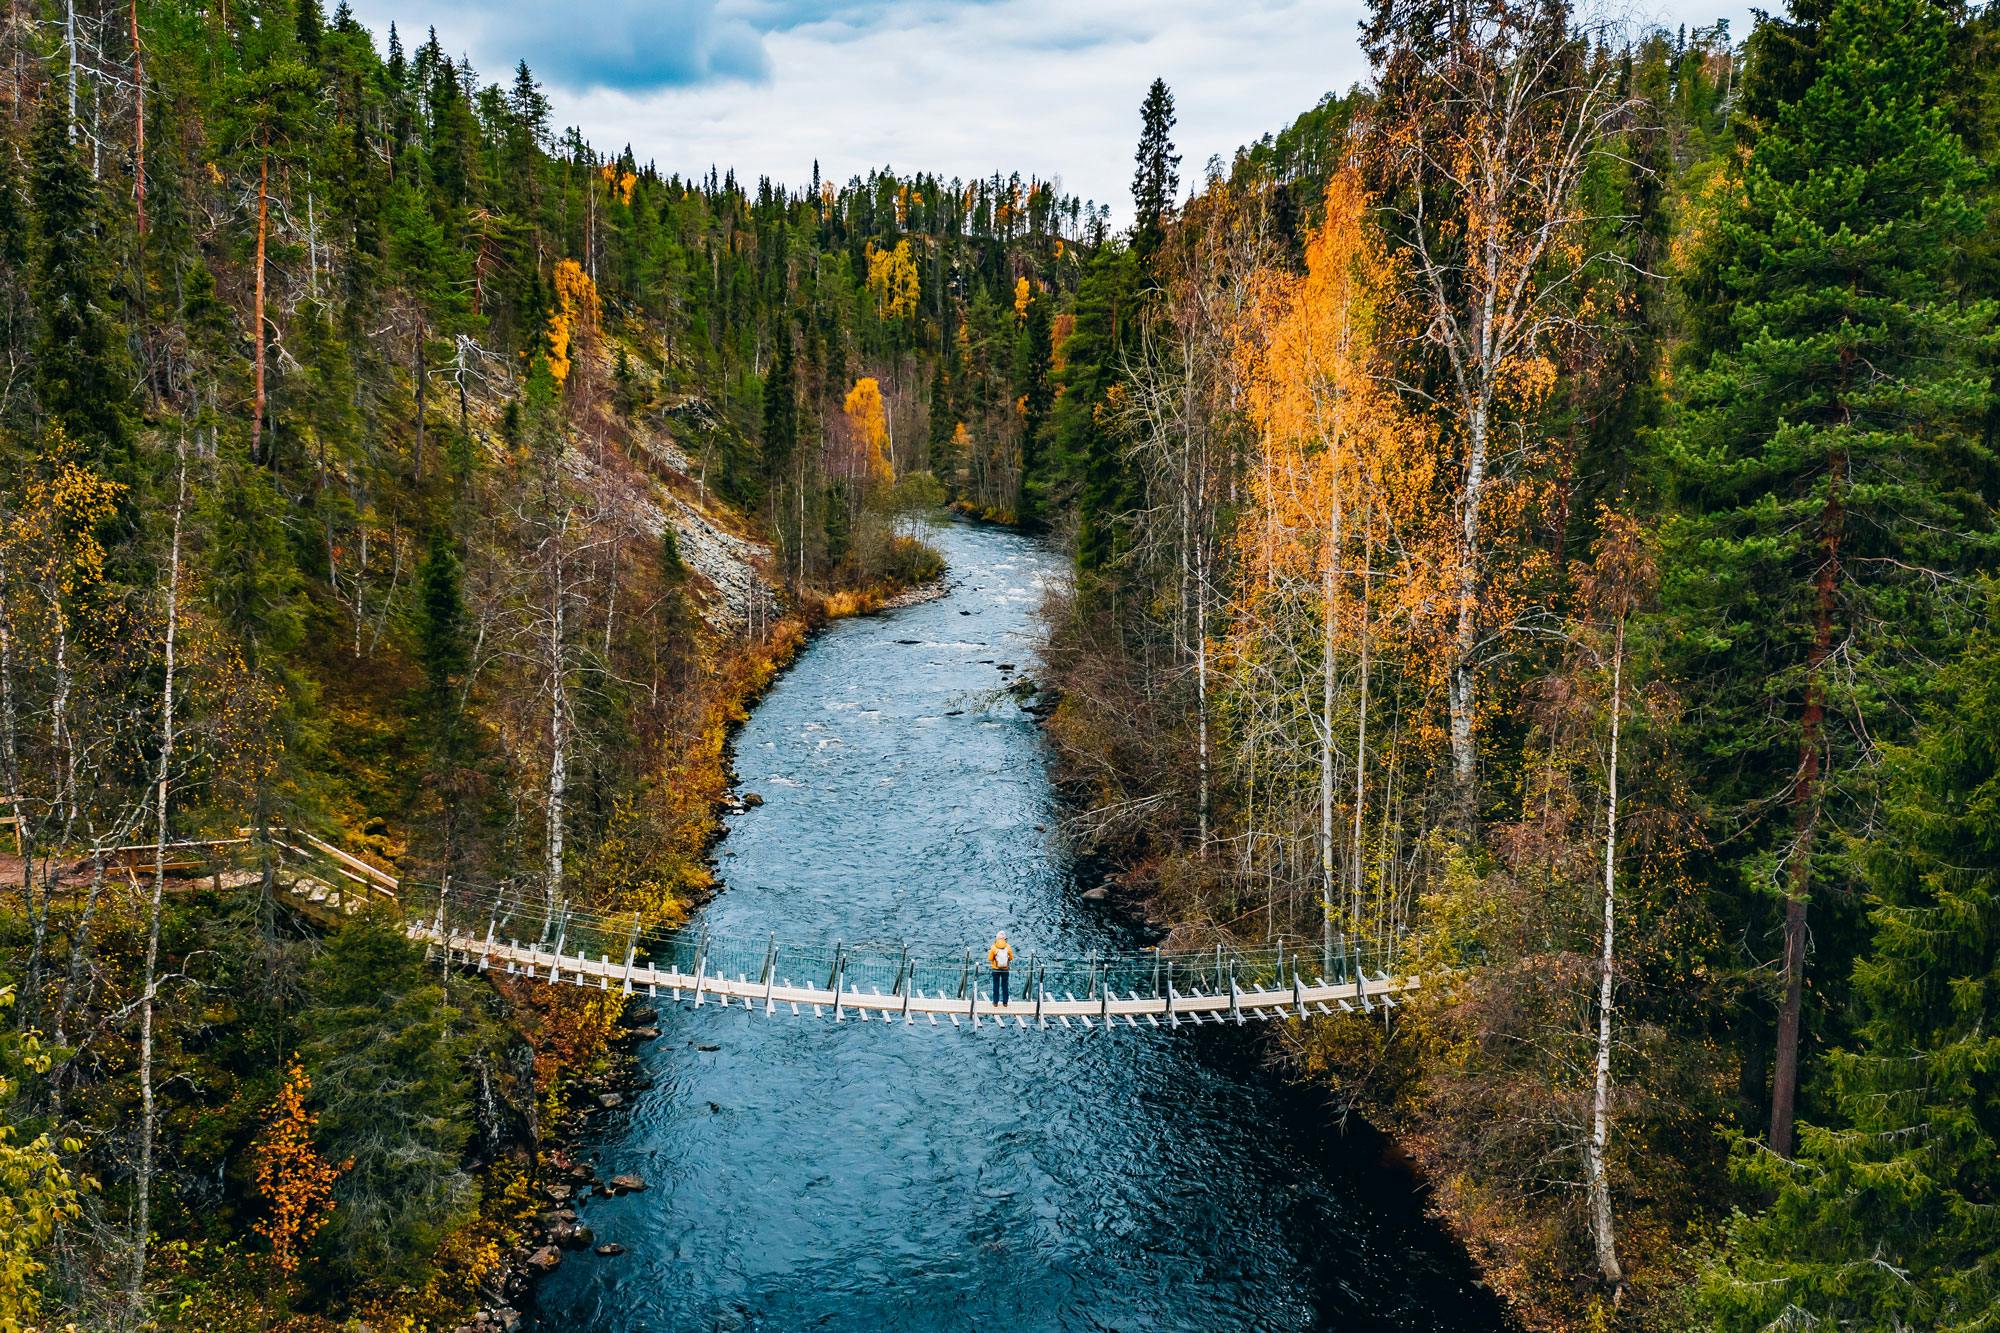 A wooden suspension bridge over a river in a Finnish forest in autumn